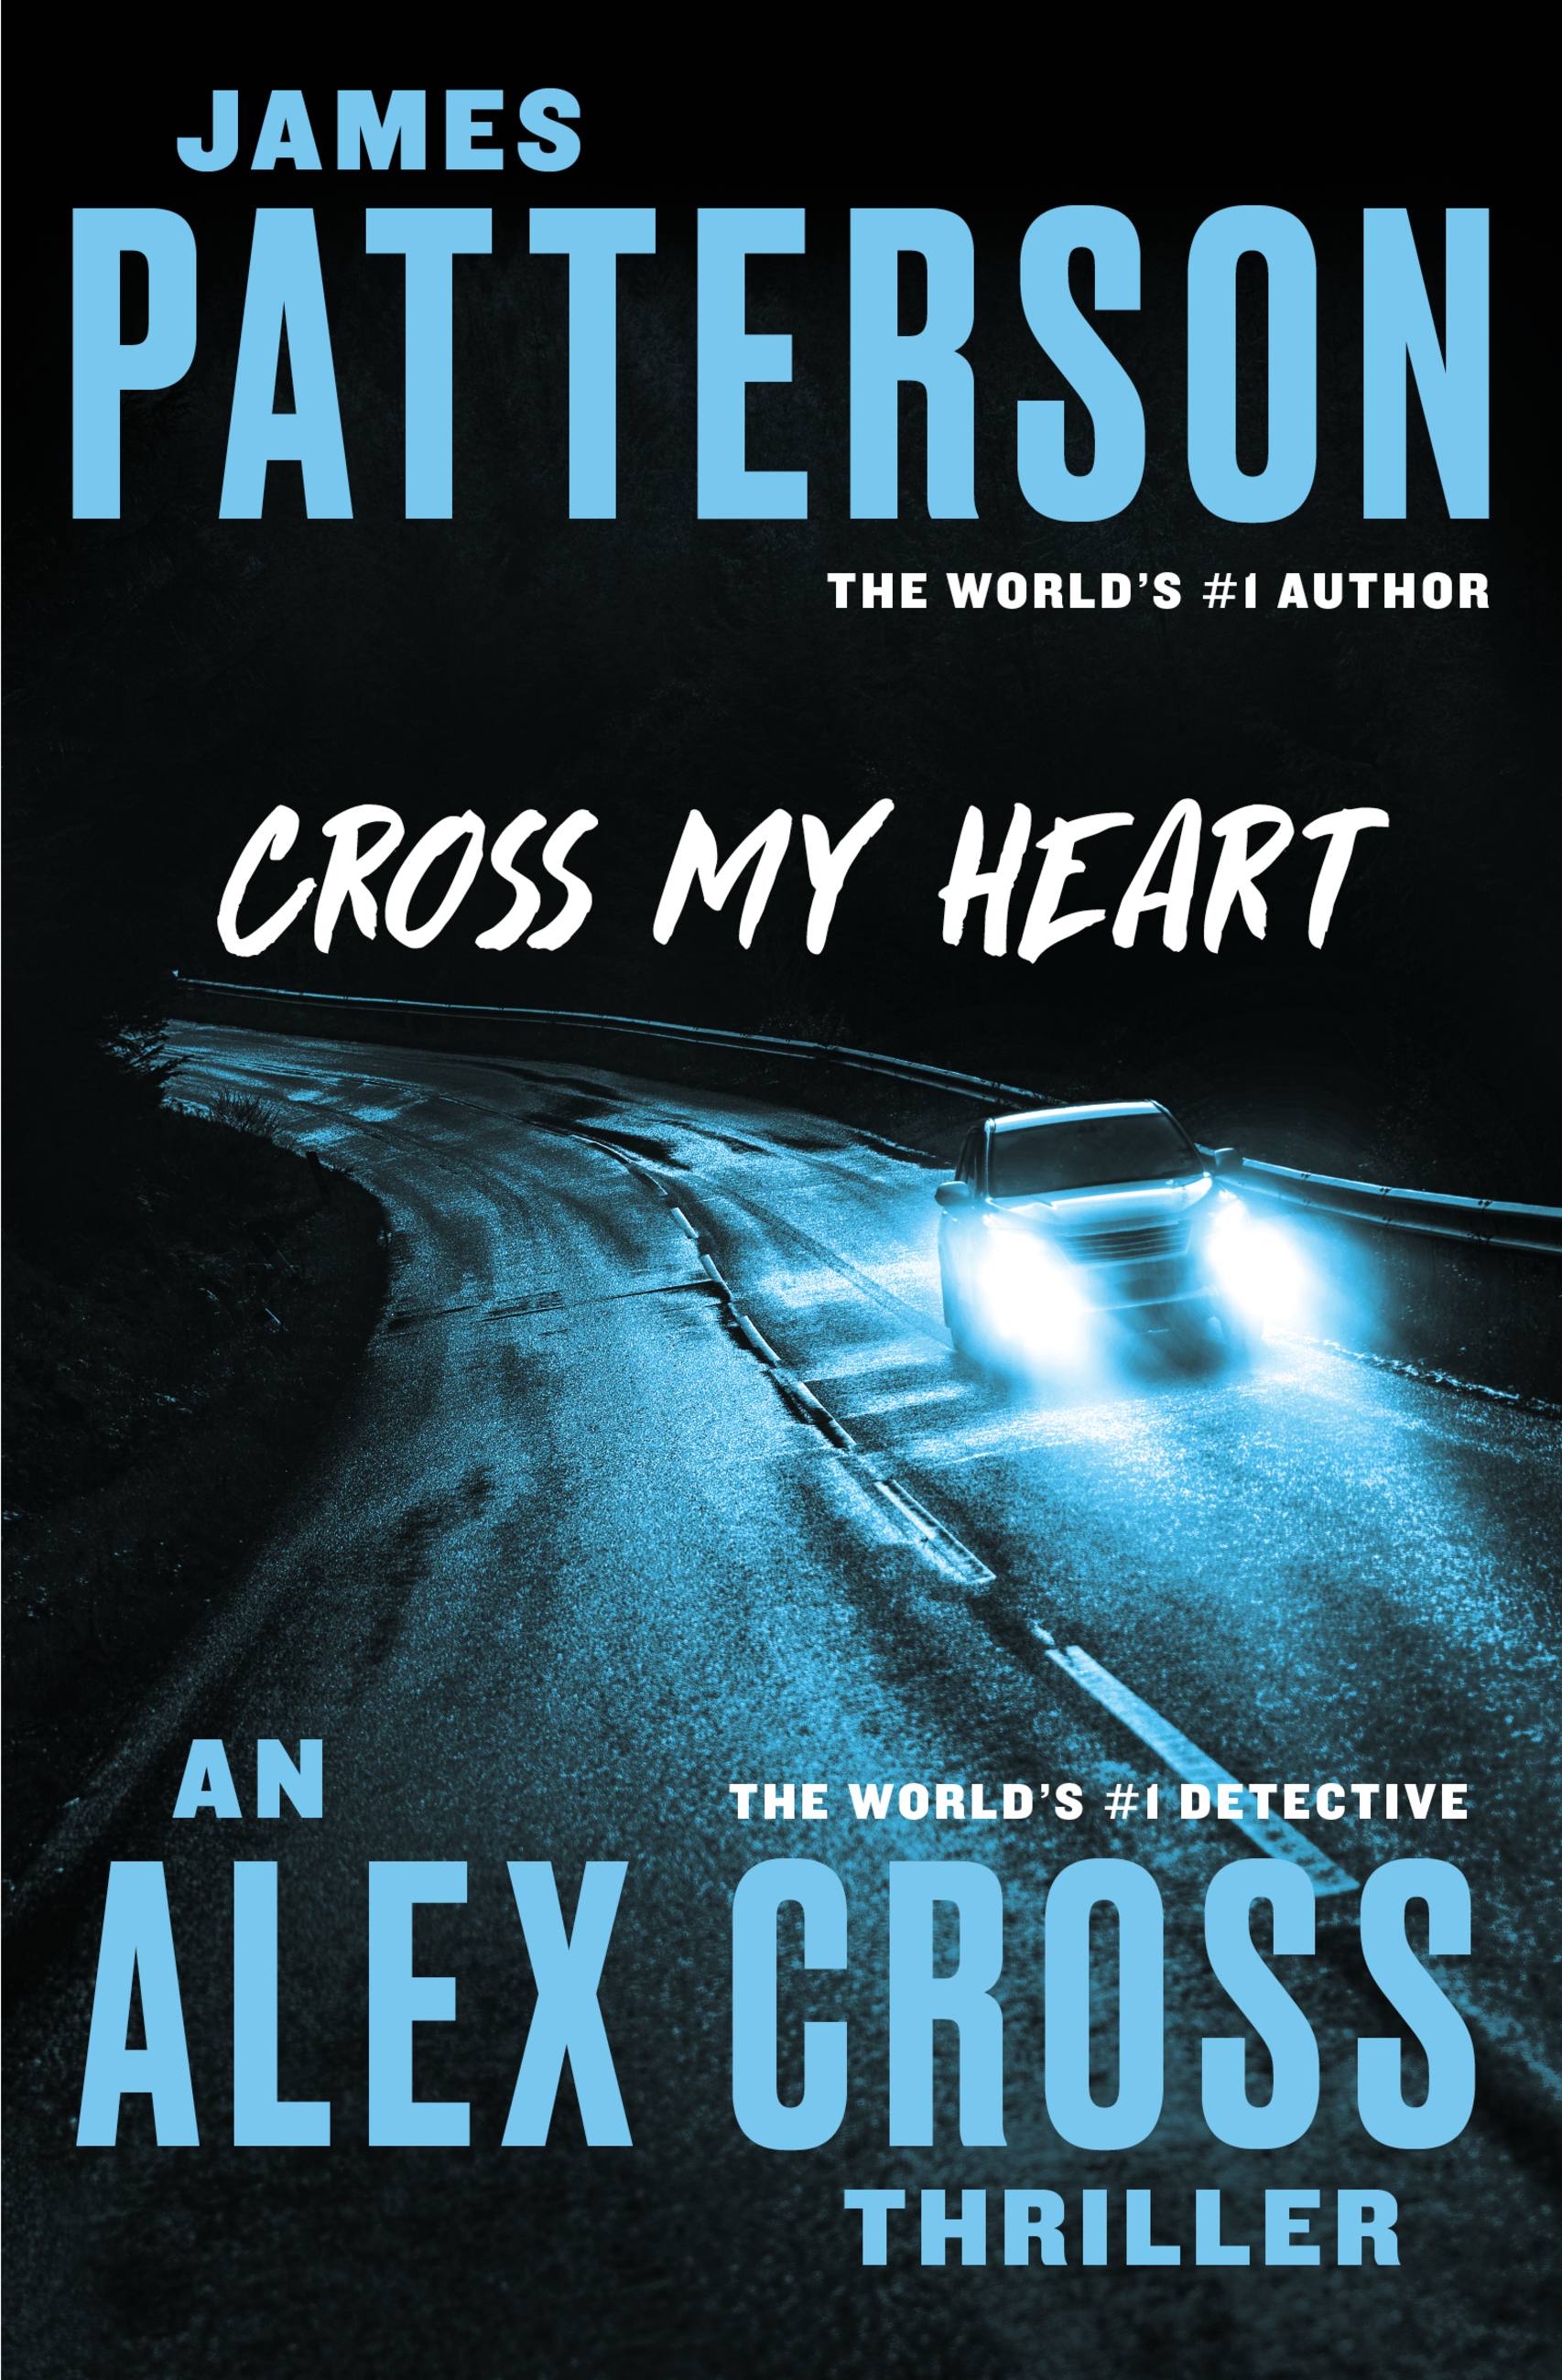 Cross My Heart by James Patterson Hachette Book Group image picture